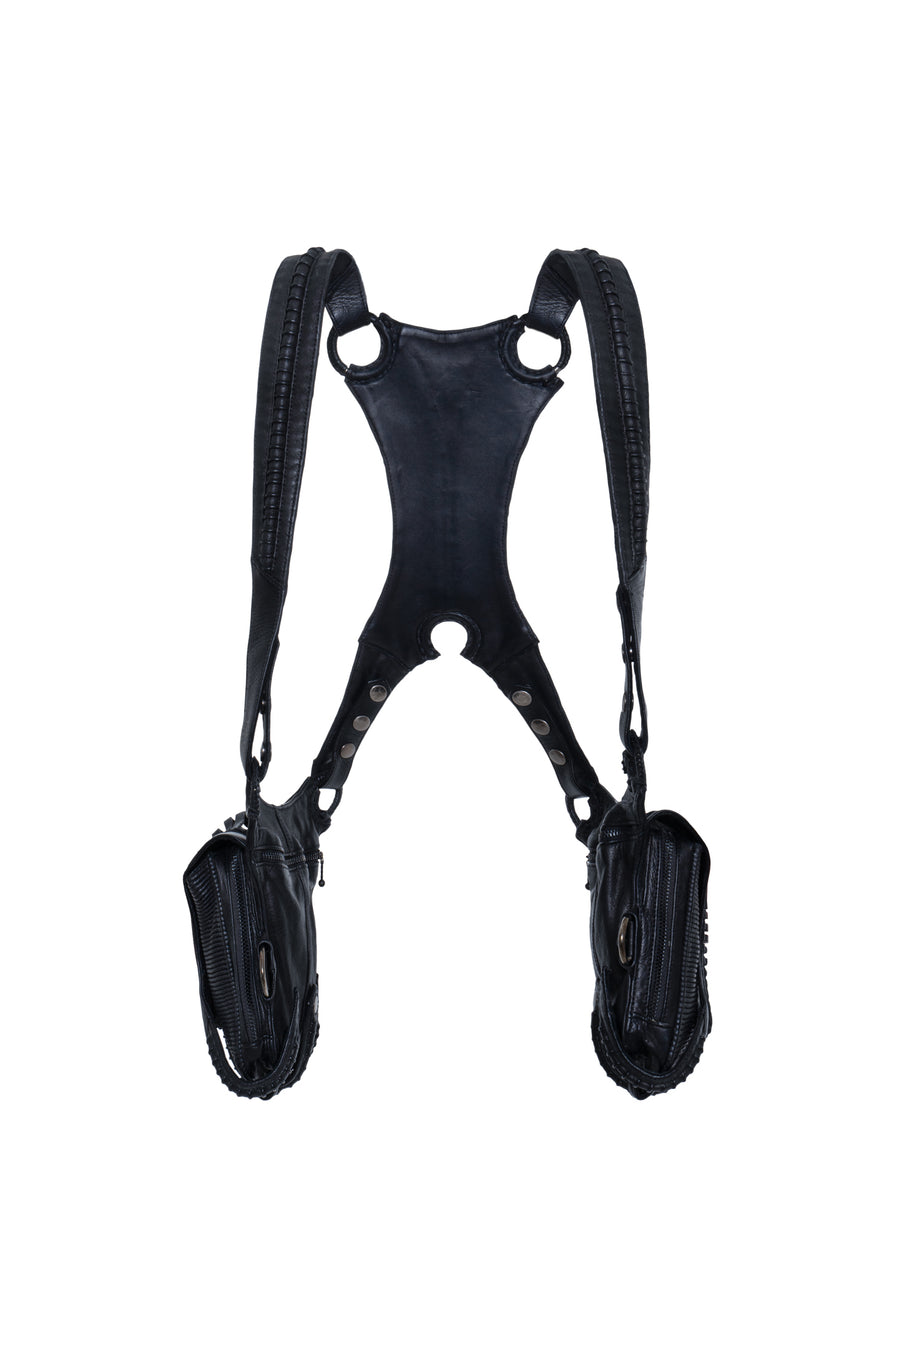 Avant-garde, biomorphic, exoskeletal double pouch leather harness bag back view